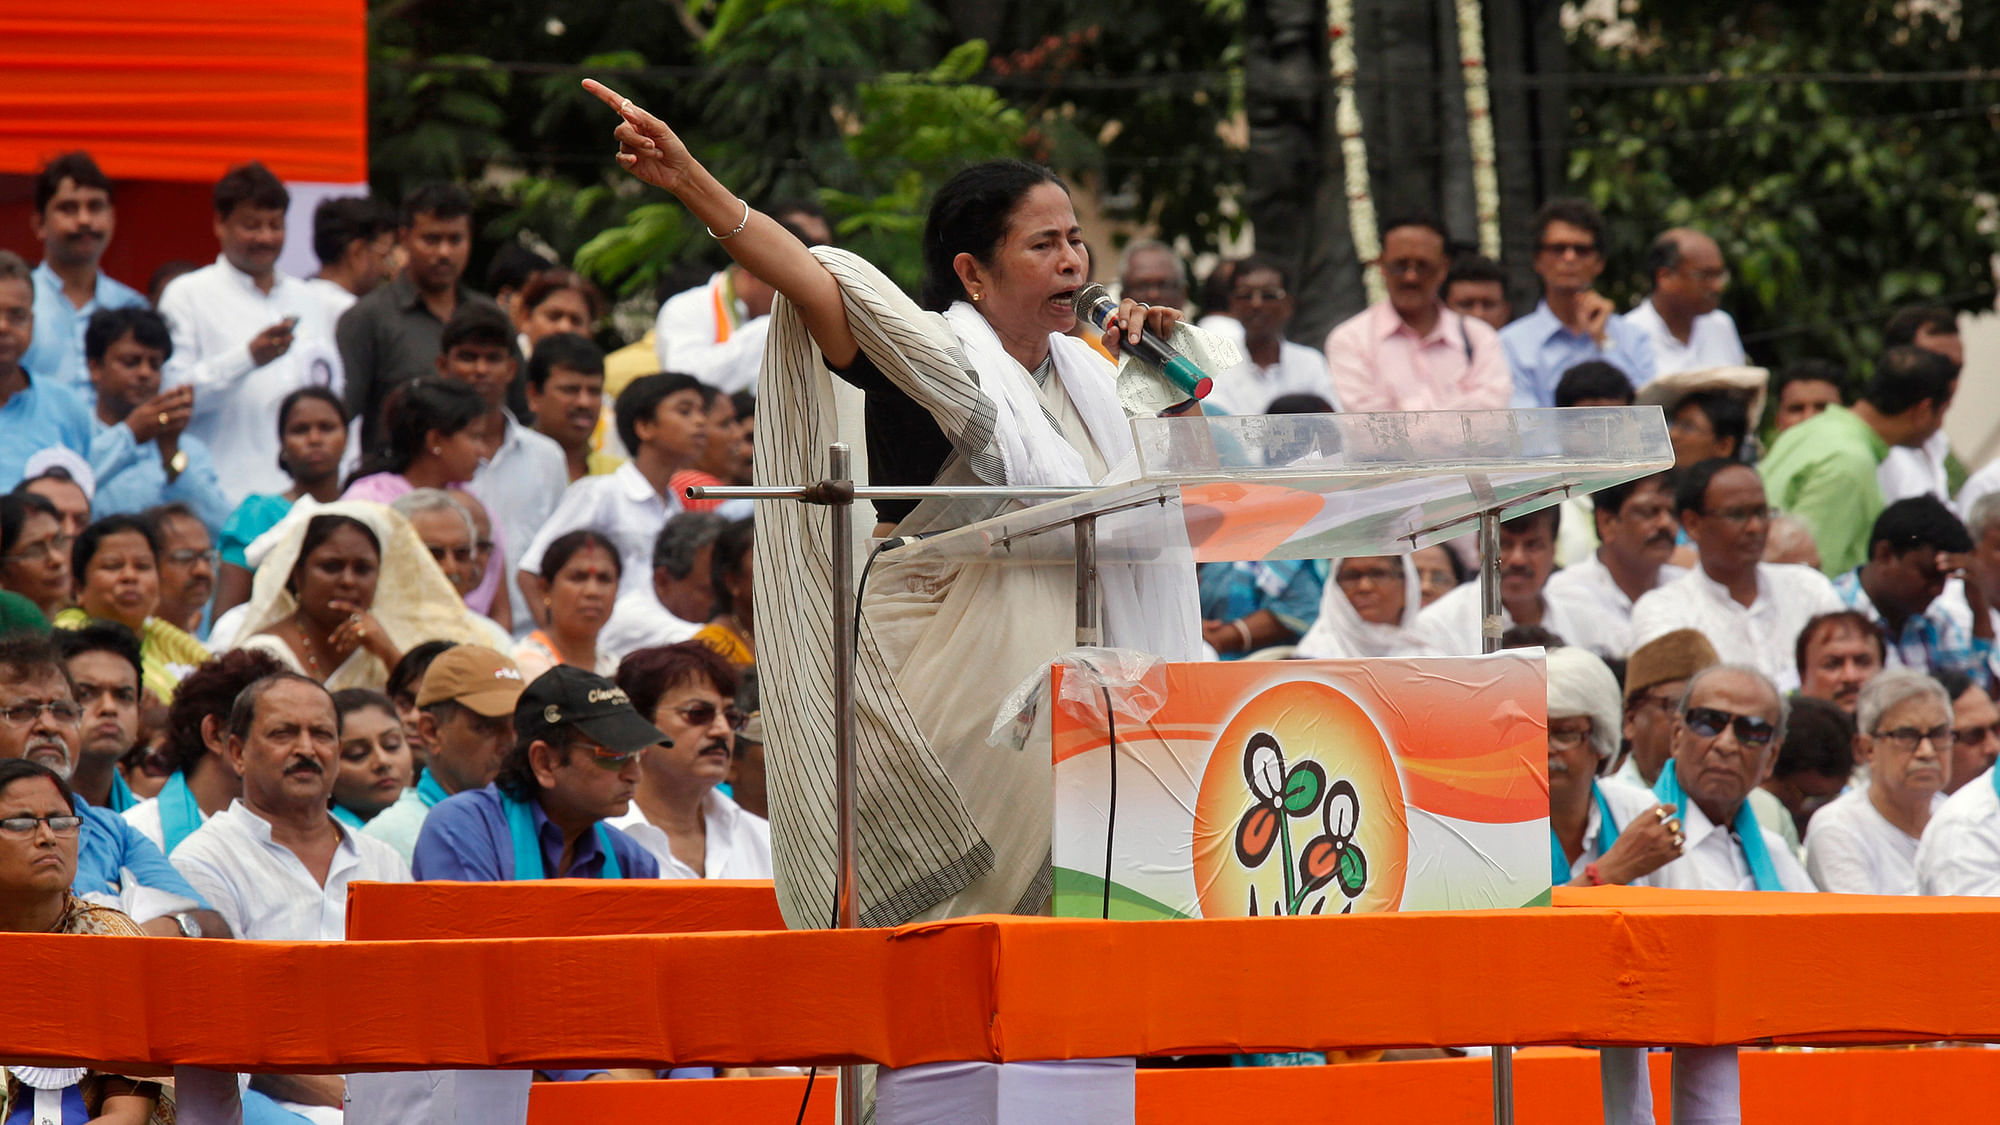  West Bengal Chief Minister&nbsp;Mamata Banerjee addresses supporters during a rally in Kolkata. (Photo: Reuters)<!--EndFragment-->